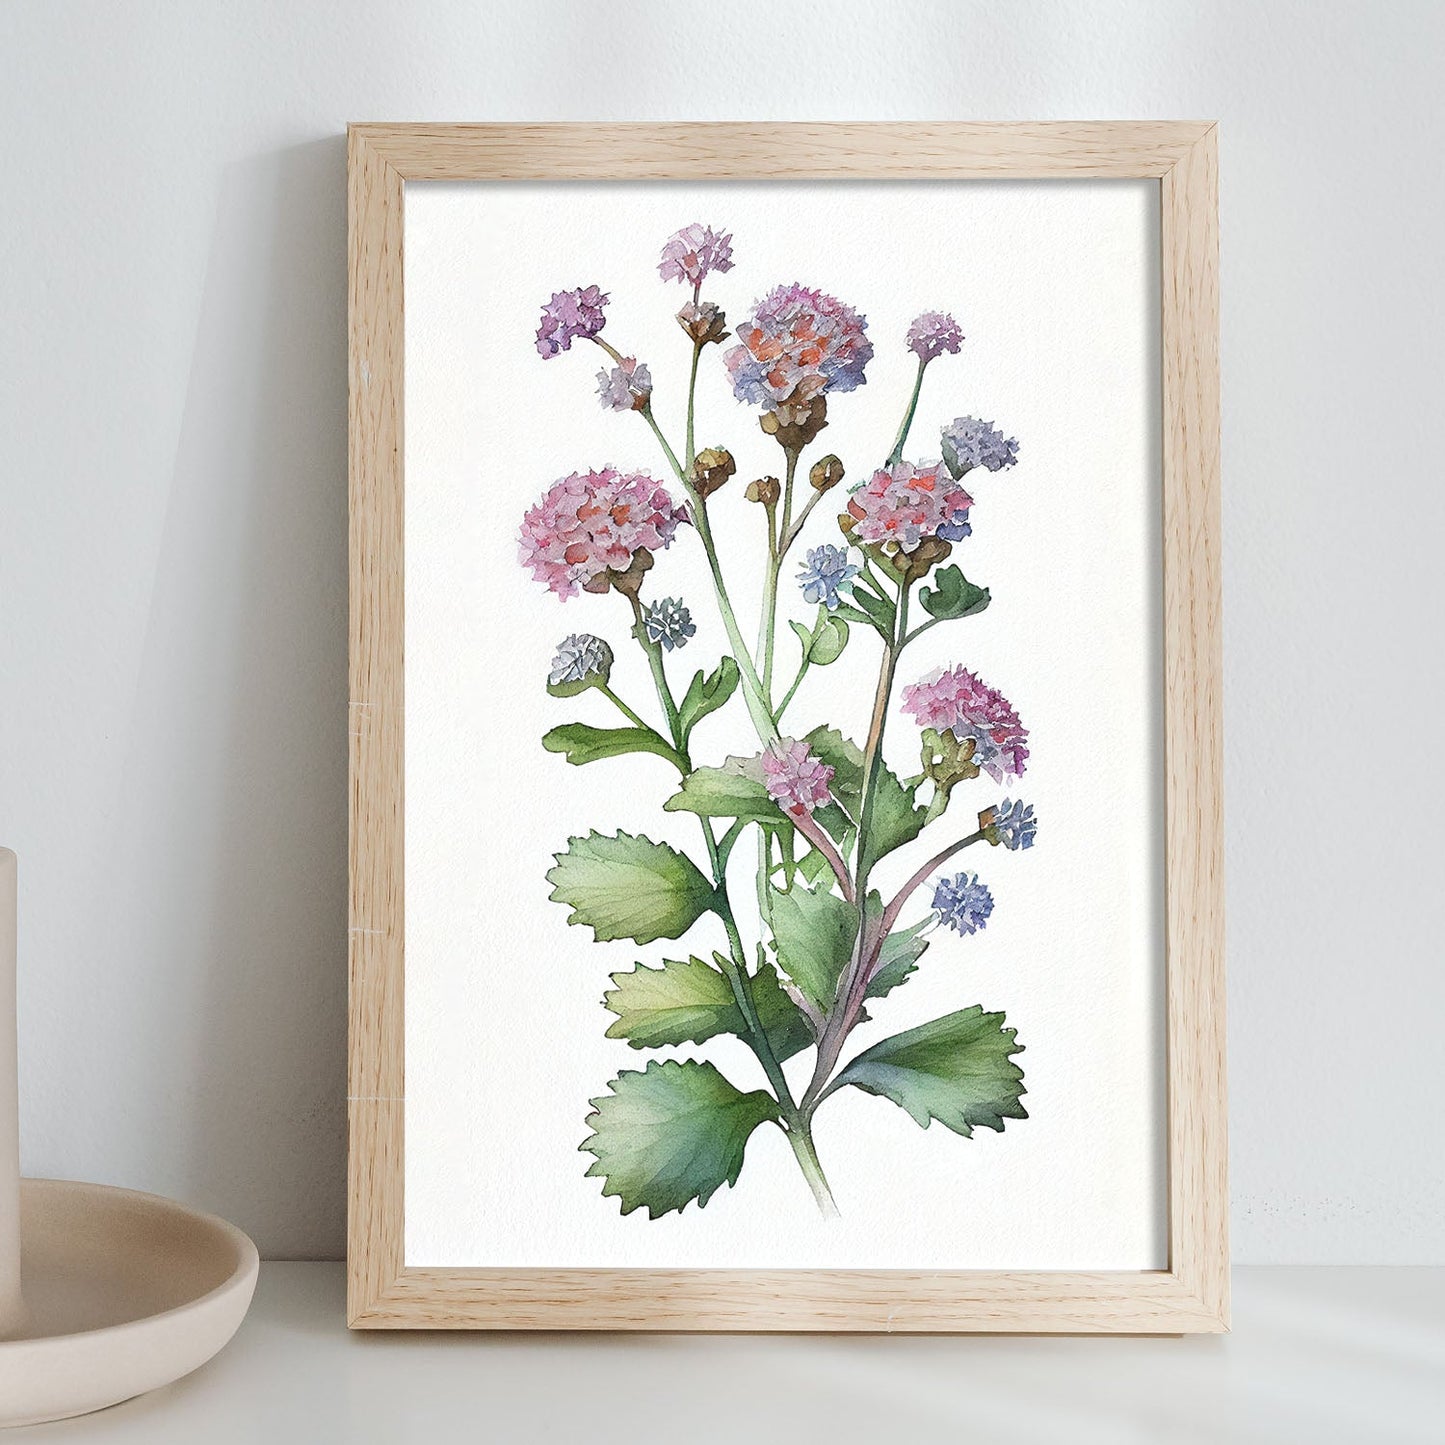 Nacnic watercolor minmal Ageratum_2. Aesthetic Wall Art Prints for Bedroom or Living Room Design.